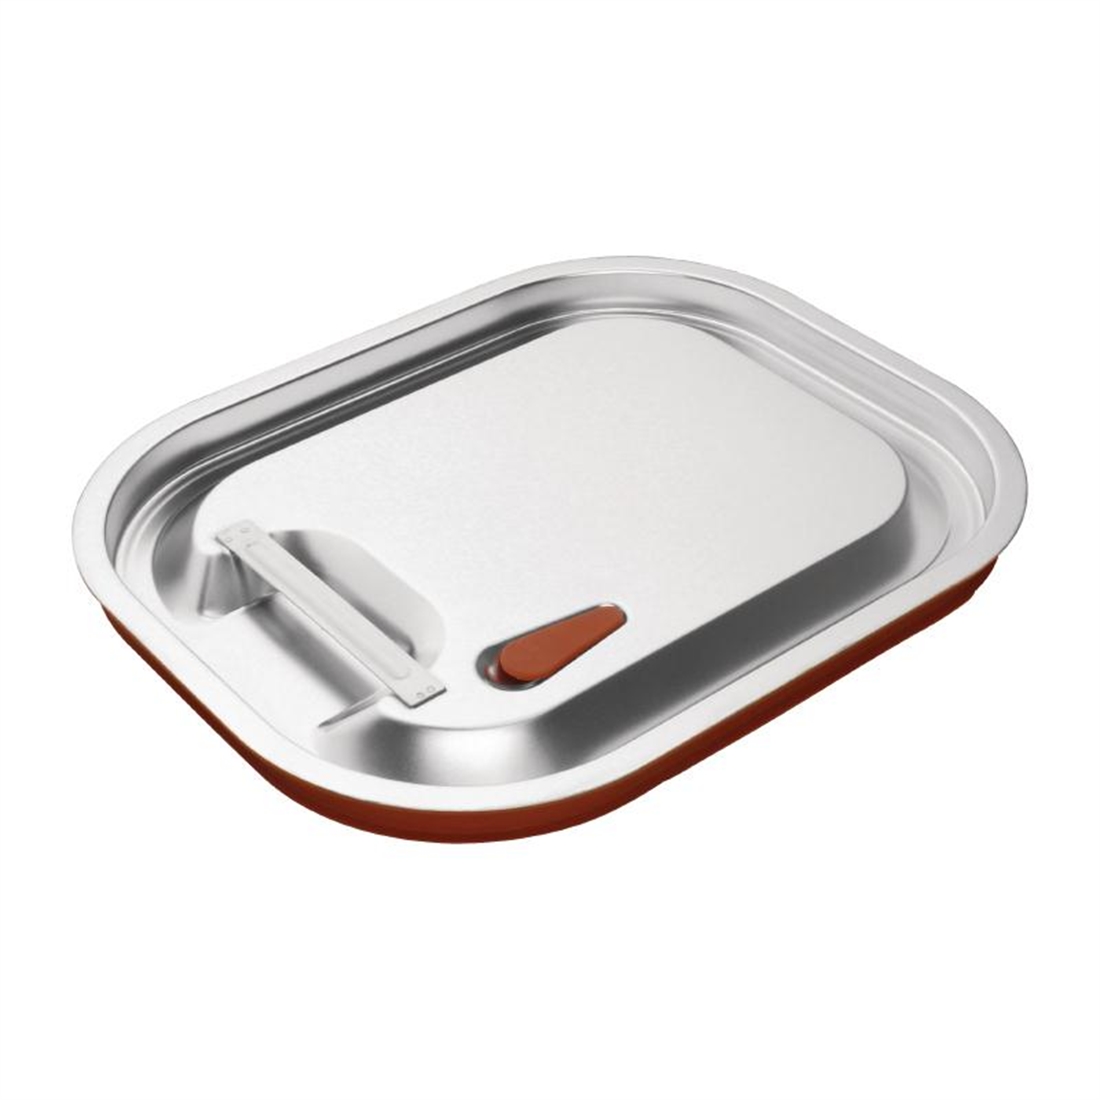 Vogue Stainless Steel and Silicone Sealable Gastronorm Lid 1/2